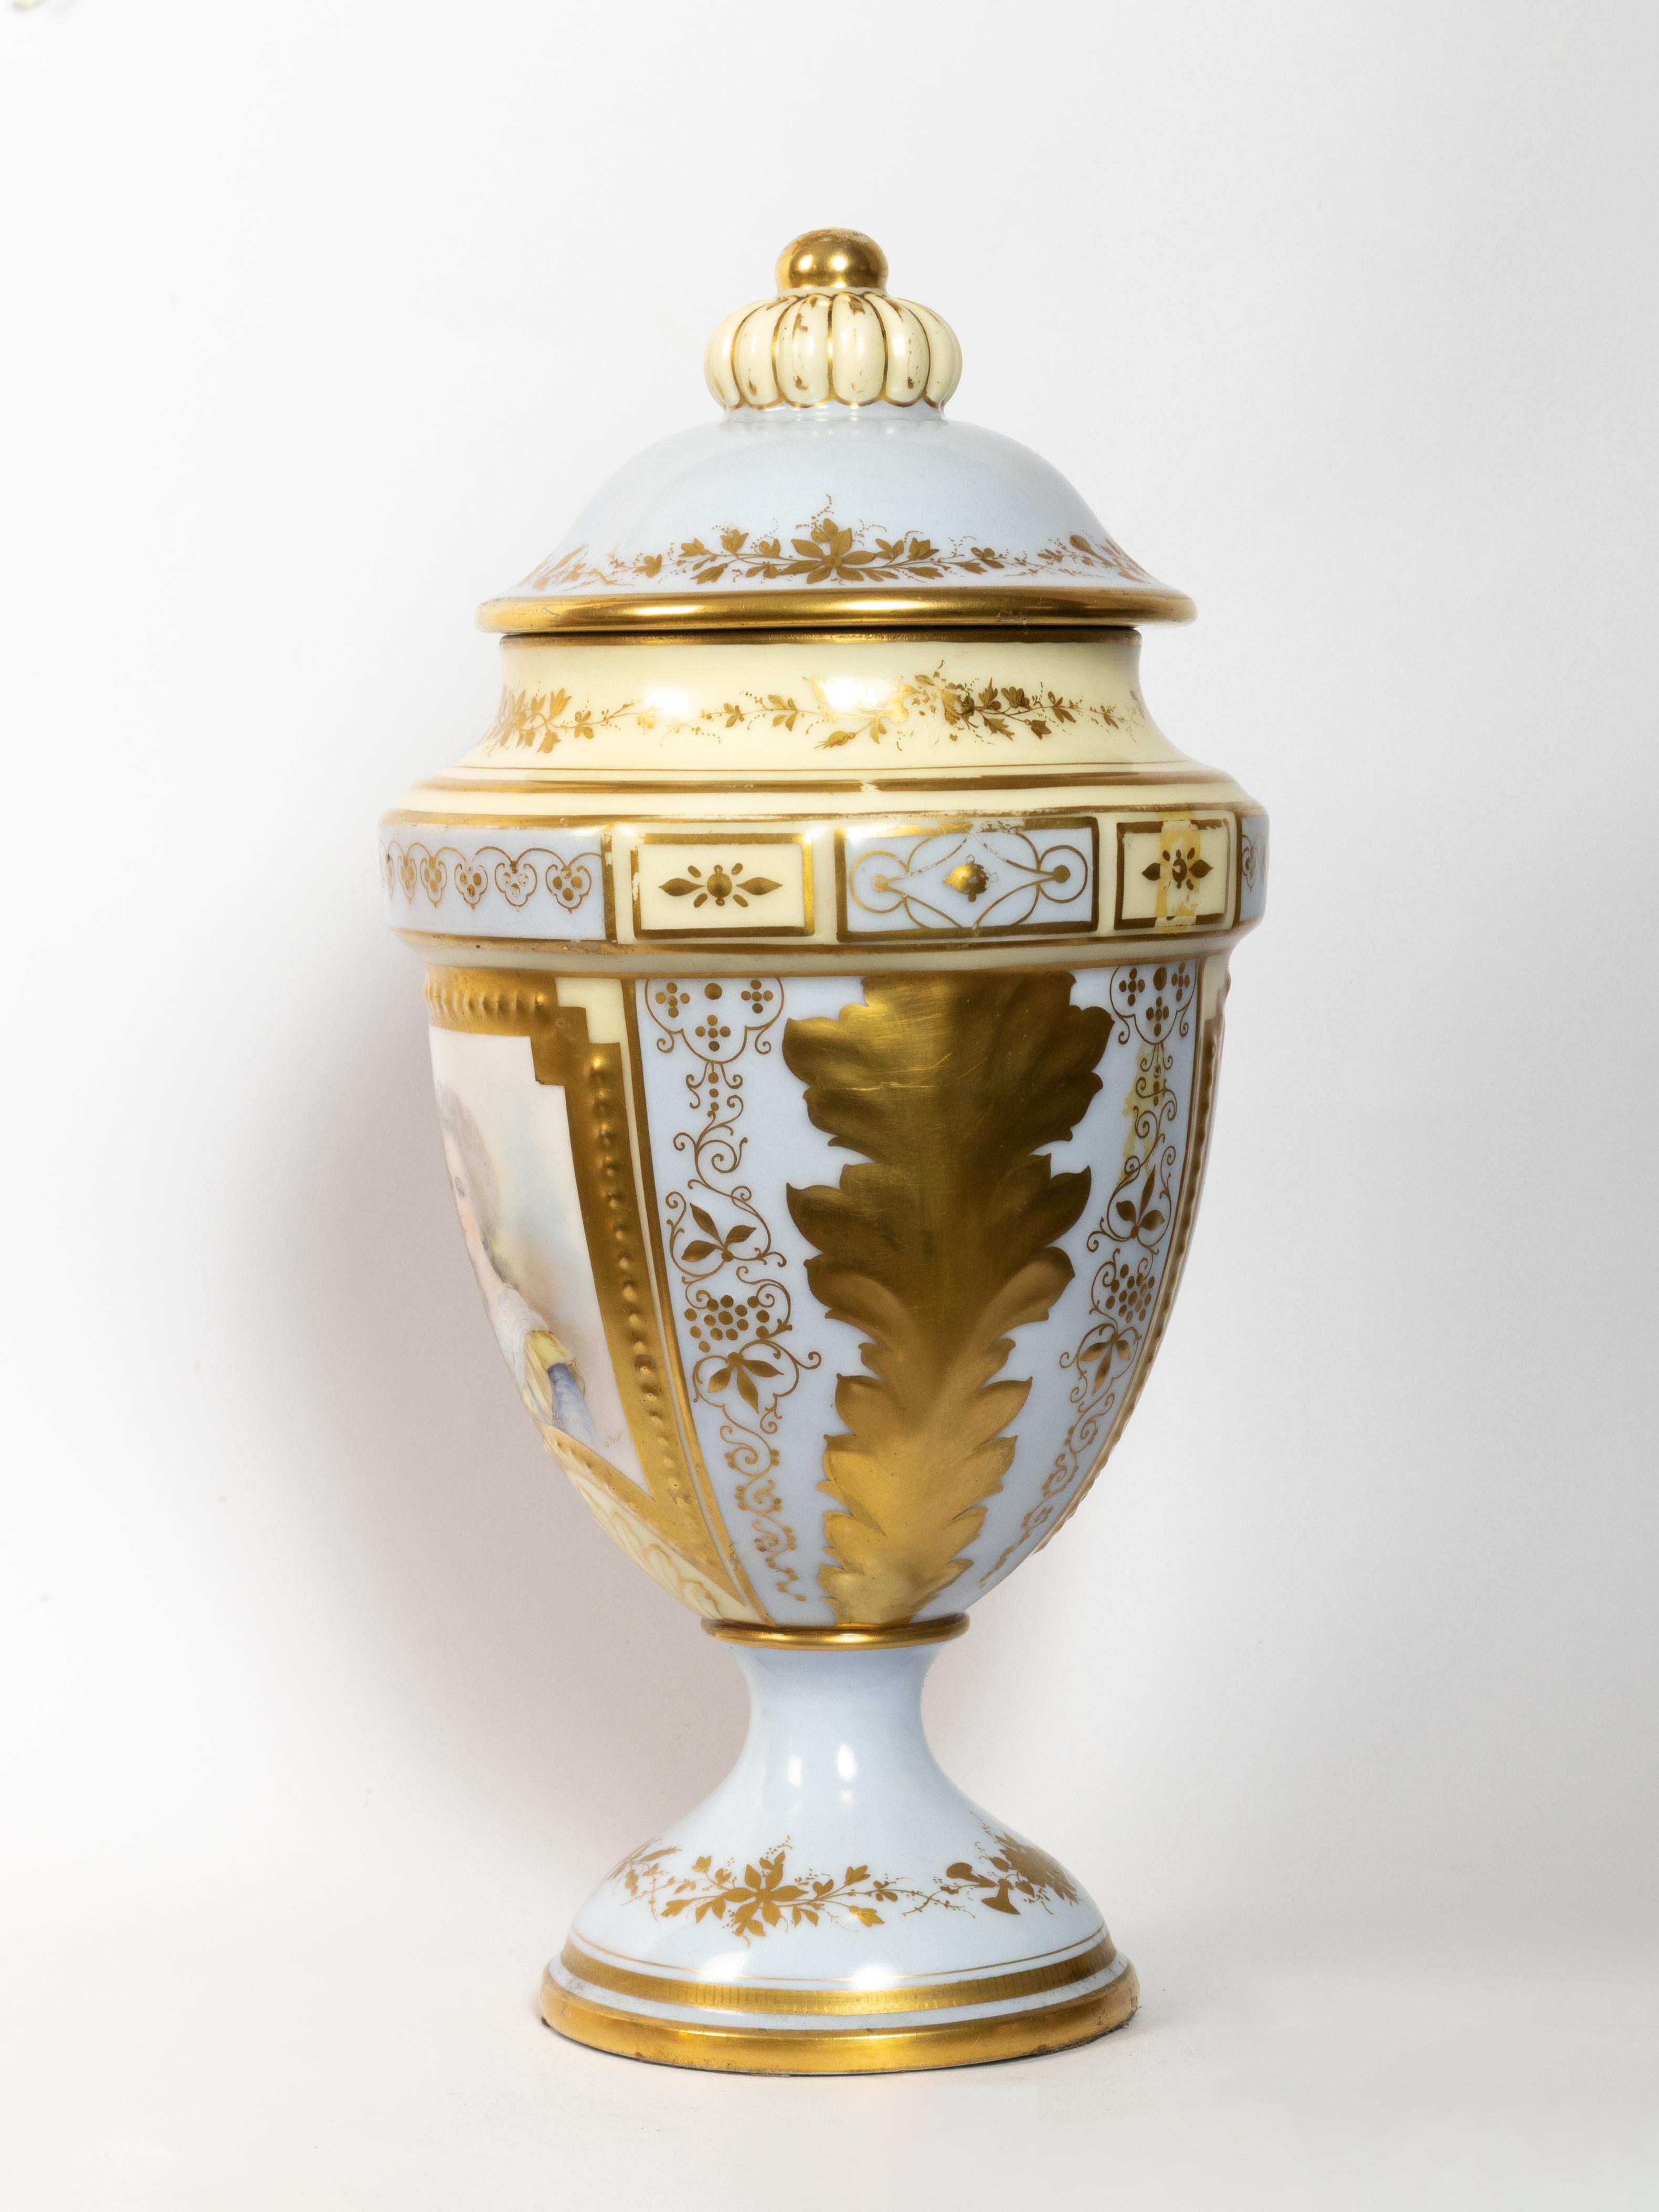 This exquisite Sevres vase from the 19th century features a delicate light blue porcelain body adorned with beautifully etched friezes and foliages. 
The golden painting adds a touch of elegance, while the pumpkin-shaped top showcases the iconic